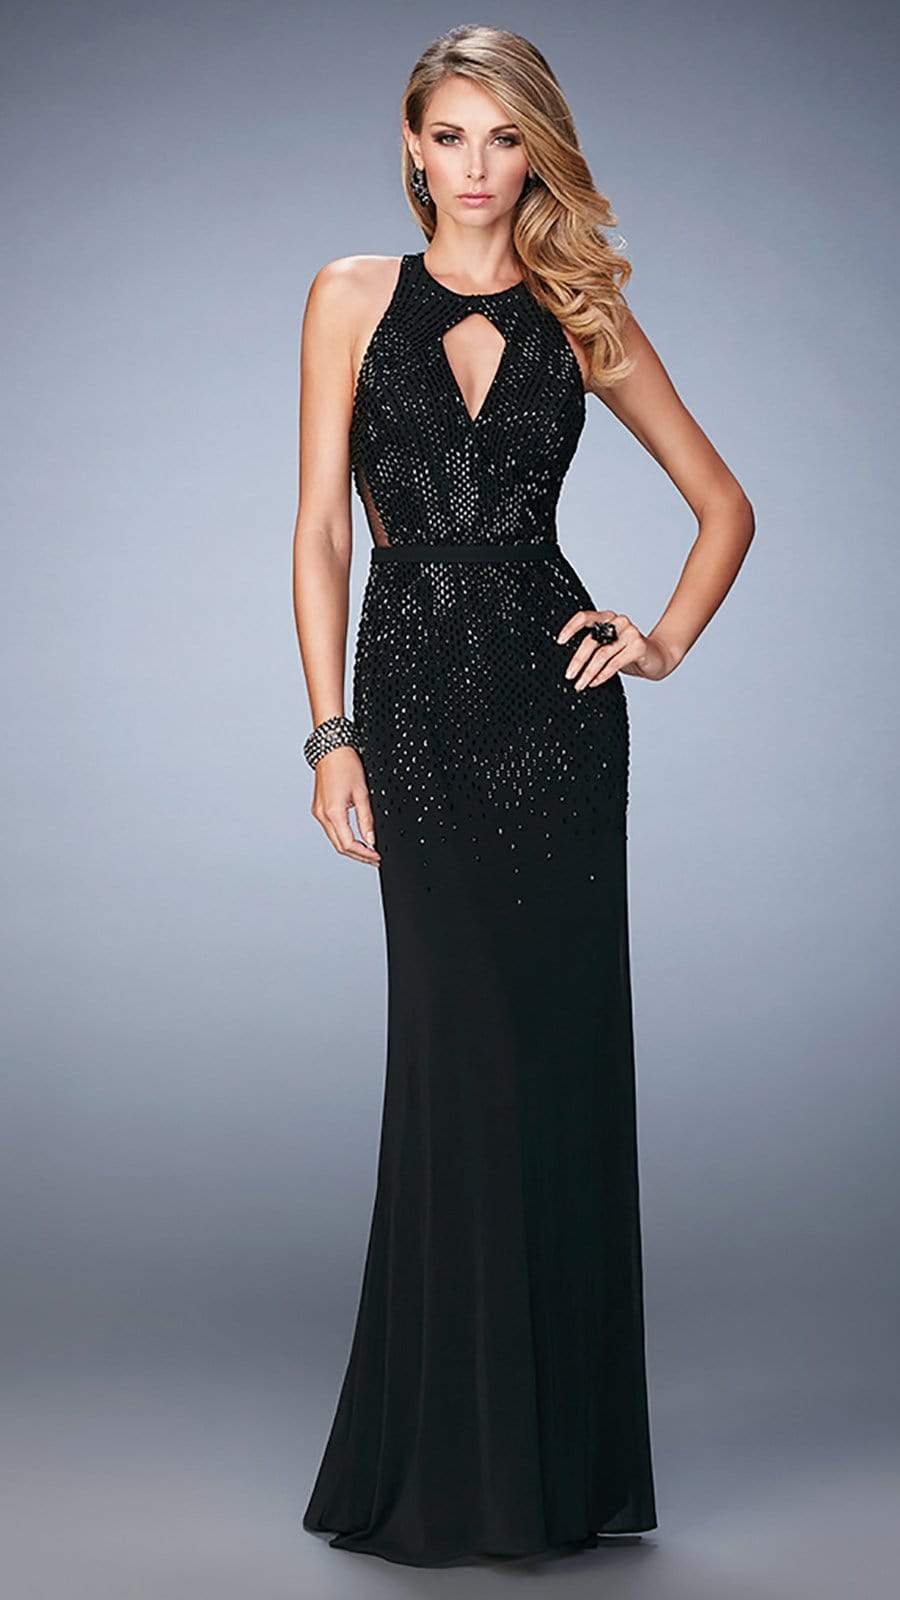 La Femme Sleeveless Halter Sequined Fitted Long Gown 22266SC - 1 Pc Plum ins Size 6, 1 Pc Black in Size 6 Available CCSALE